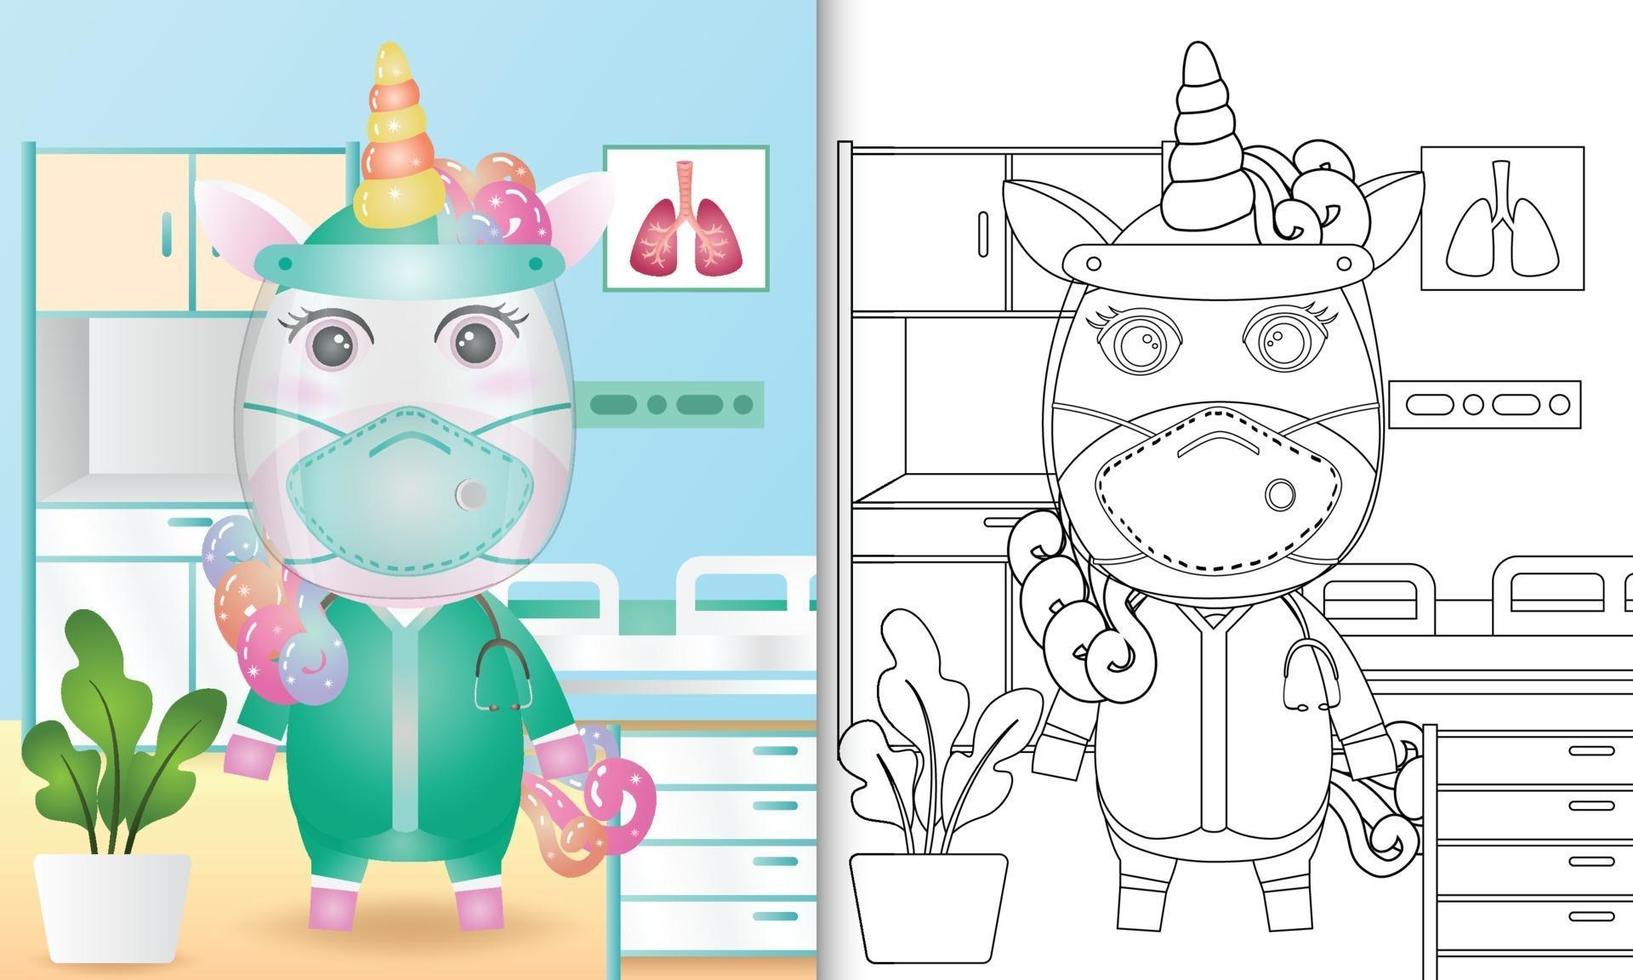 Coloring book for kids with a cute unicorn character illustration vector